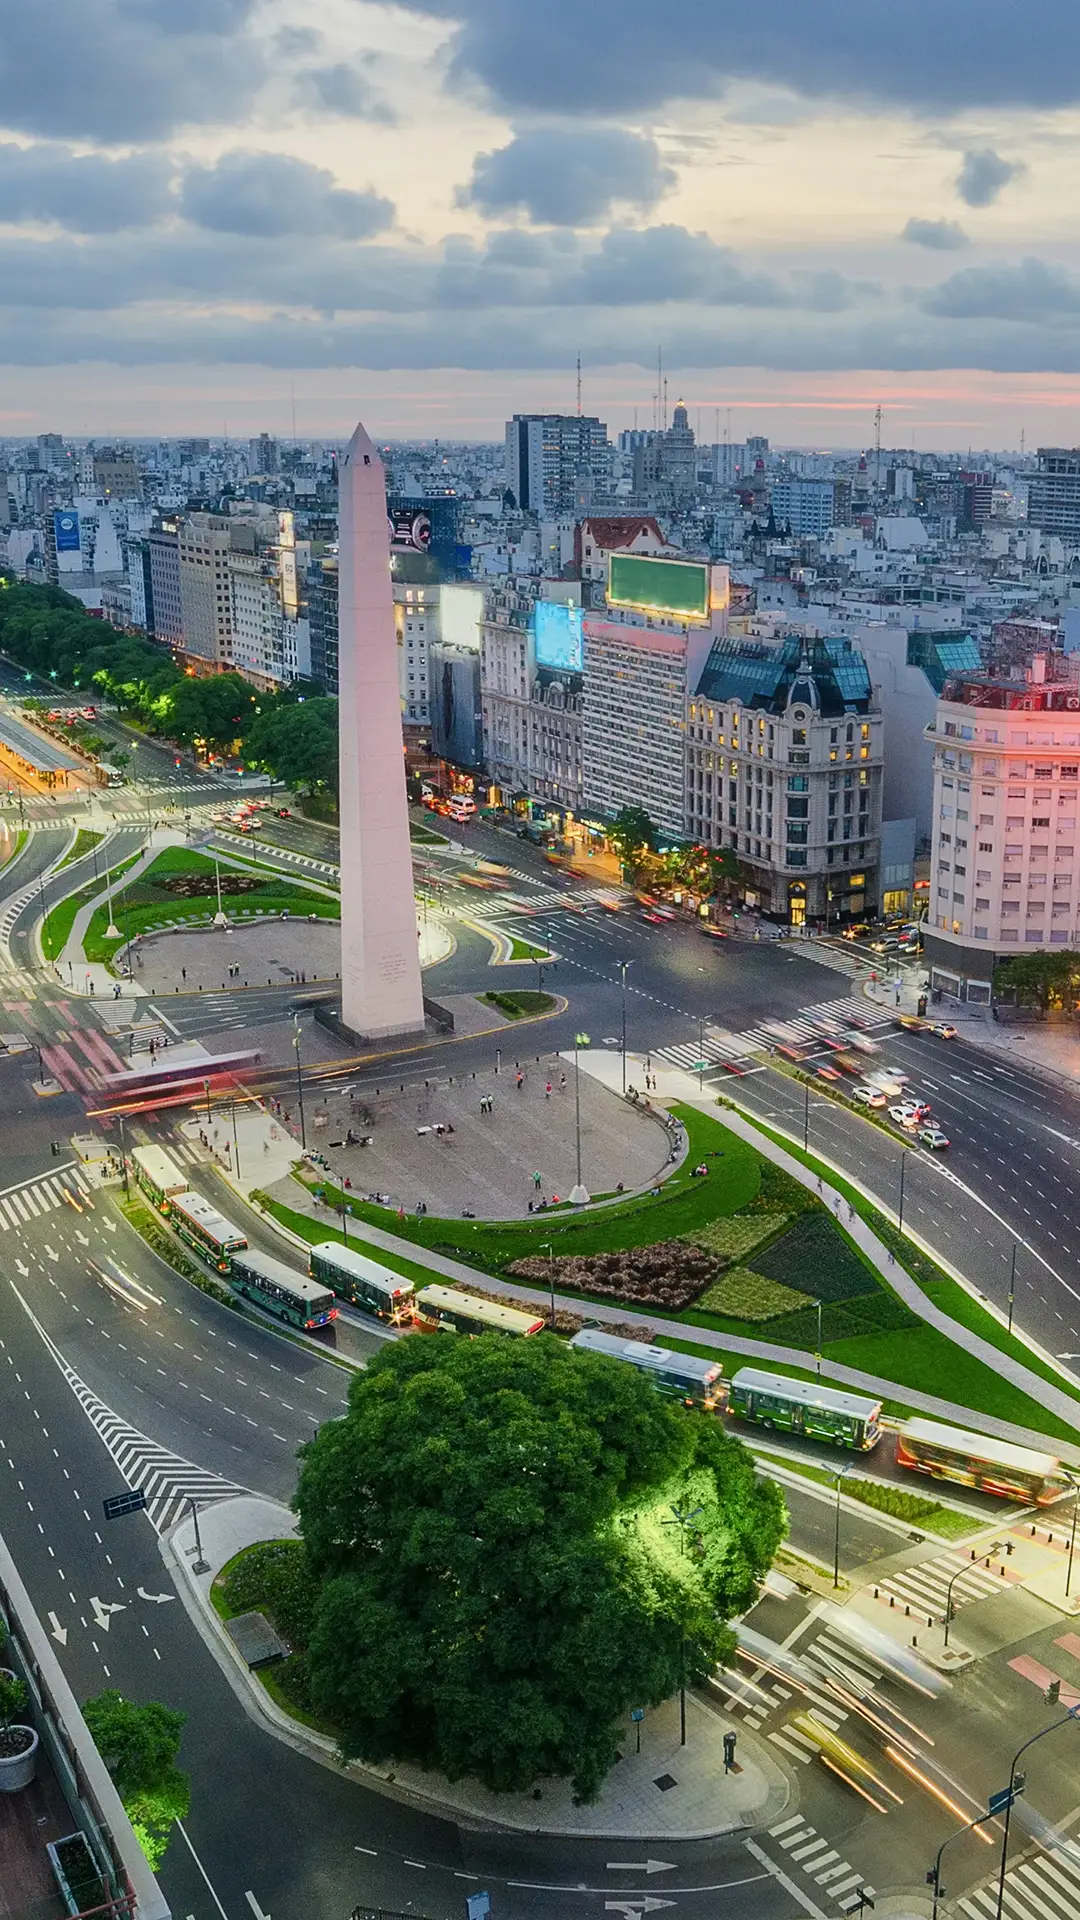 The Capital City of Buenos Aires in Argentina.